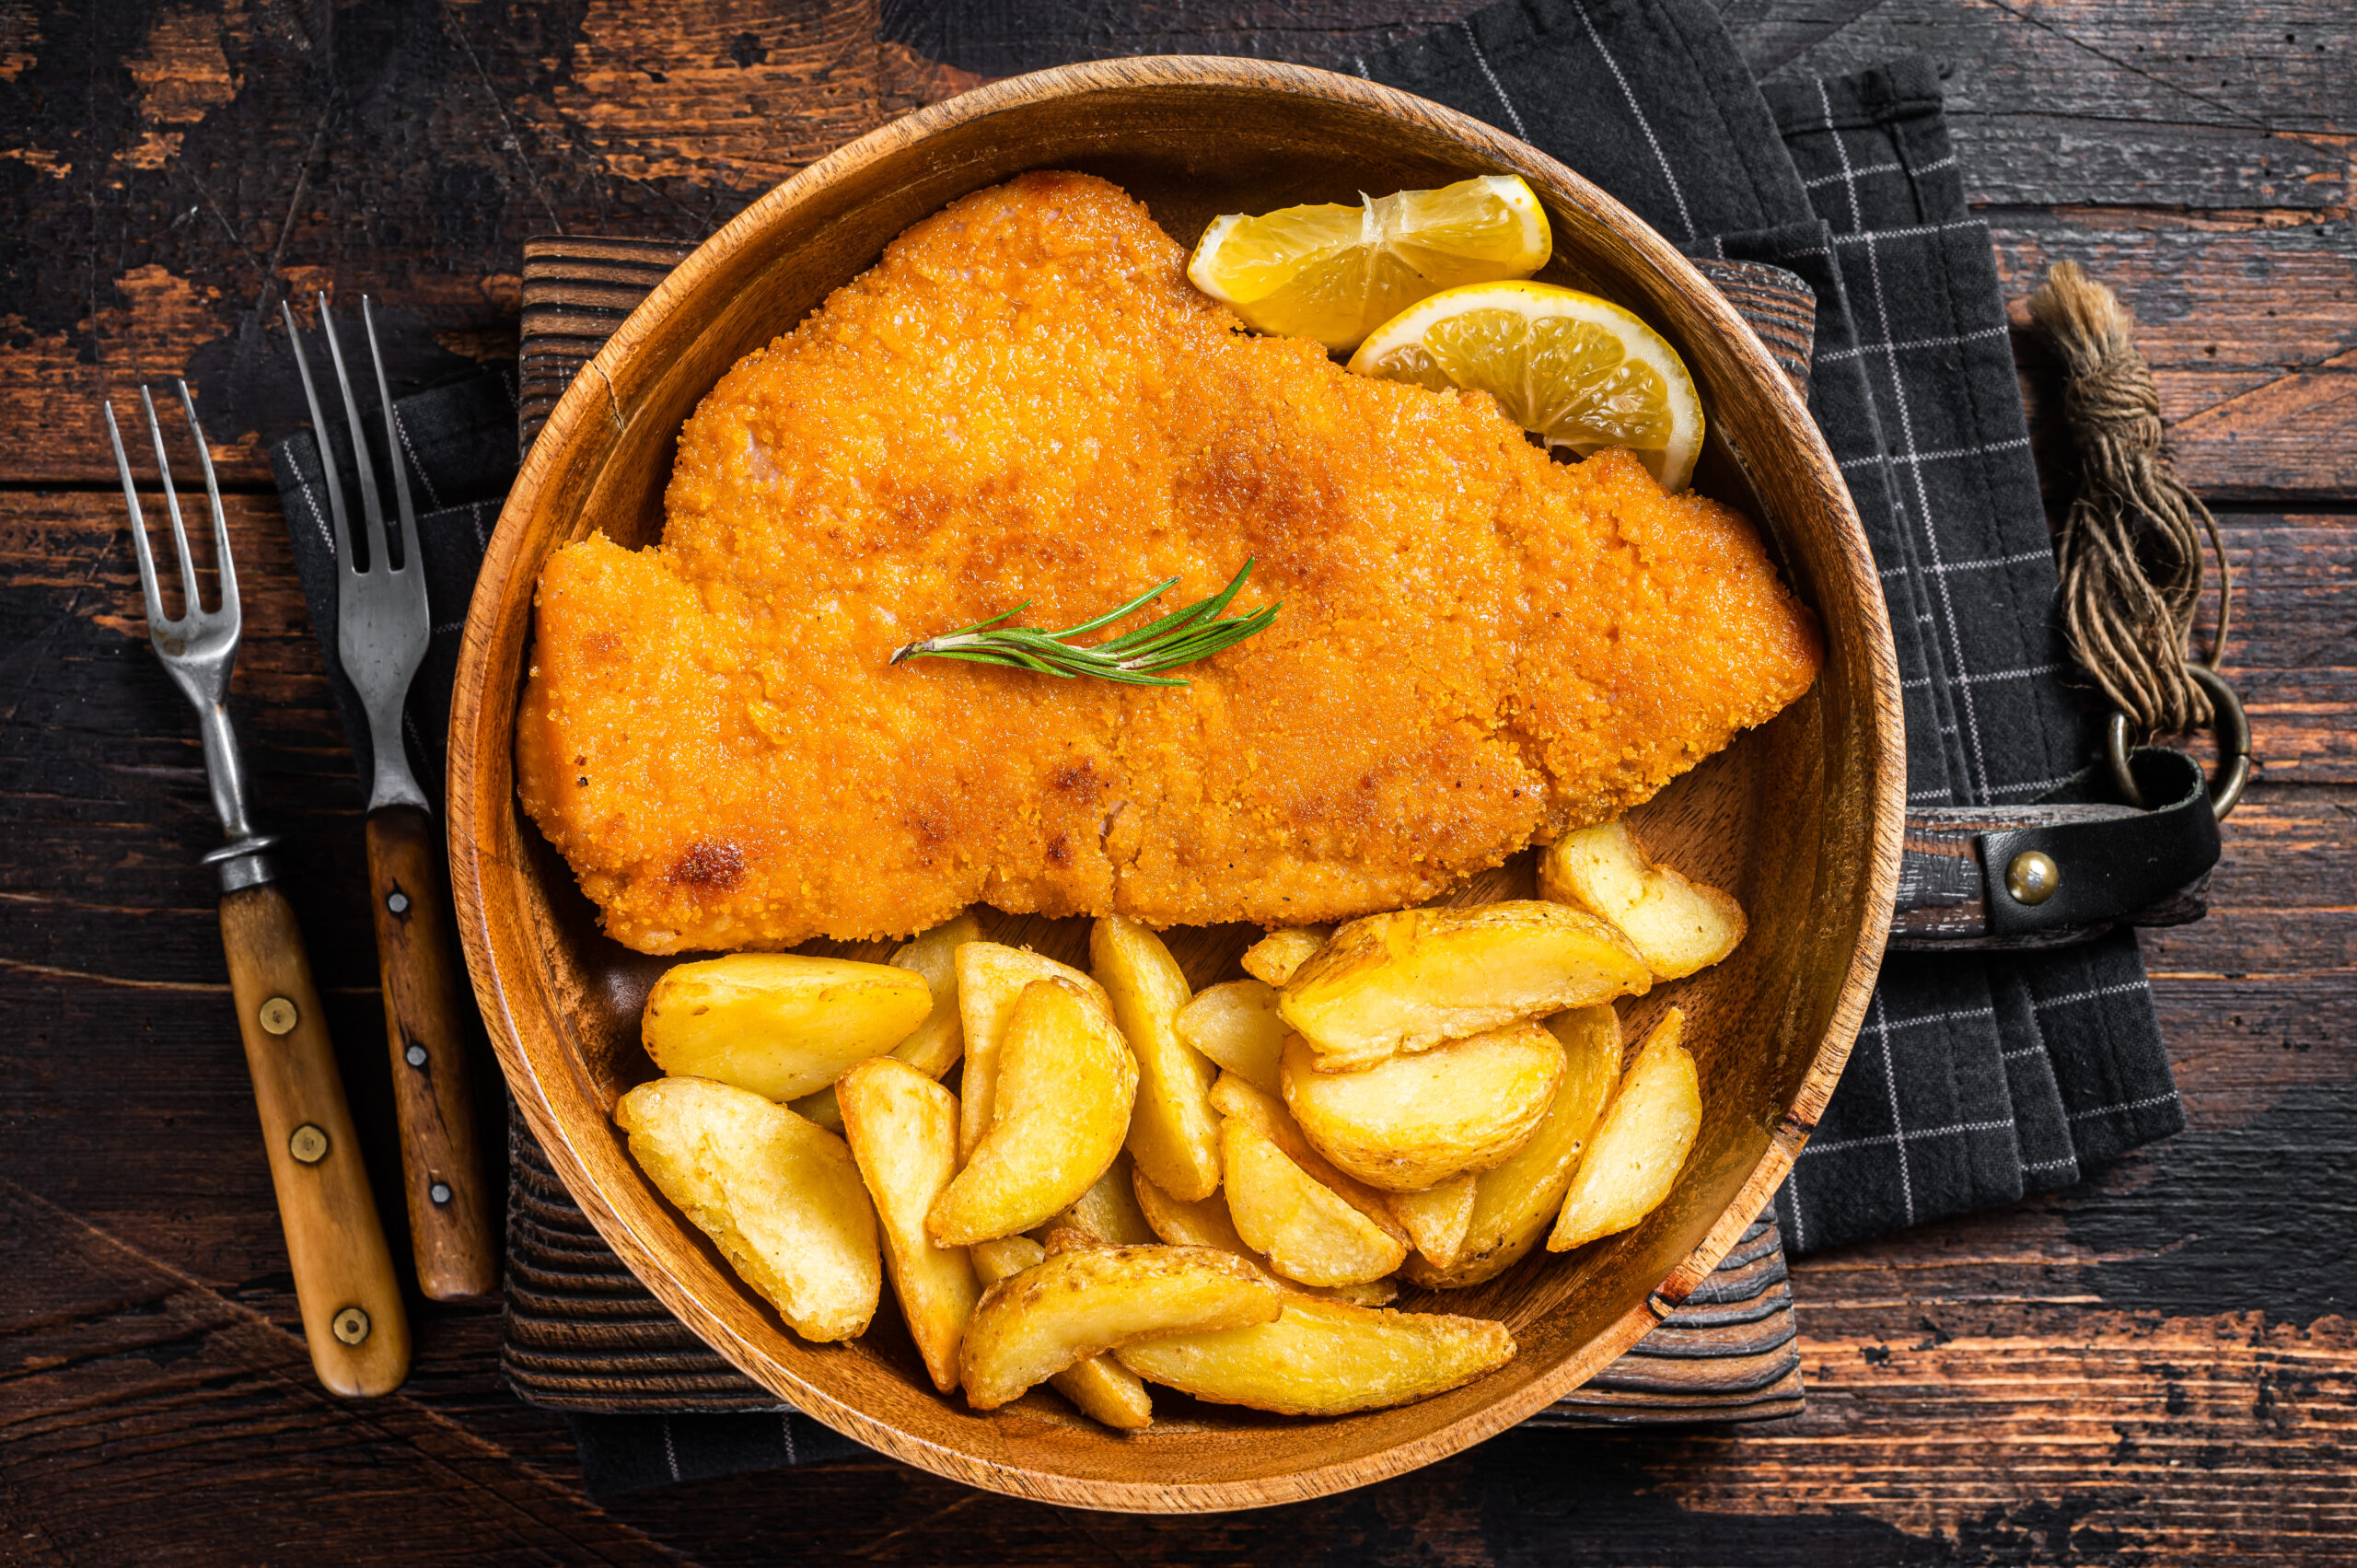 Austrian fried weiner schnitzel with potato wedges in a wooden plate. Wooden background. Top view.